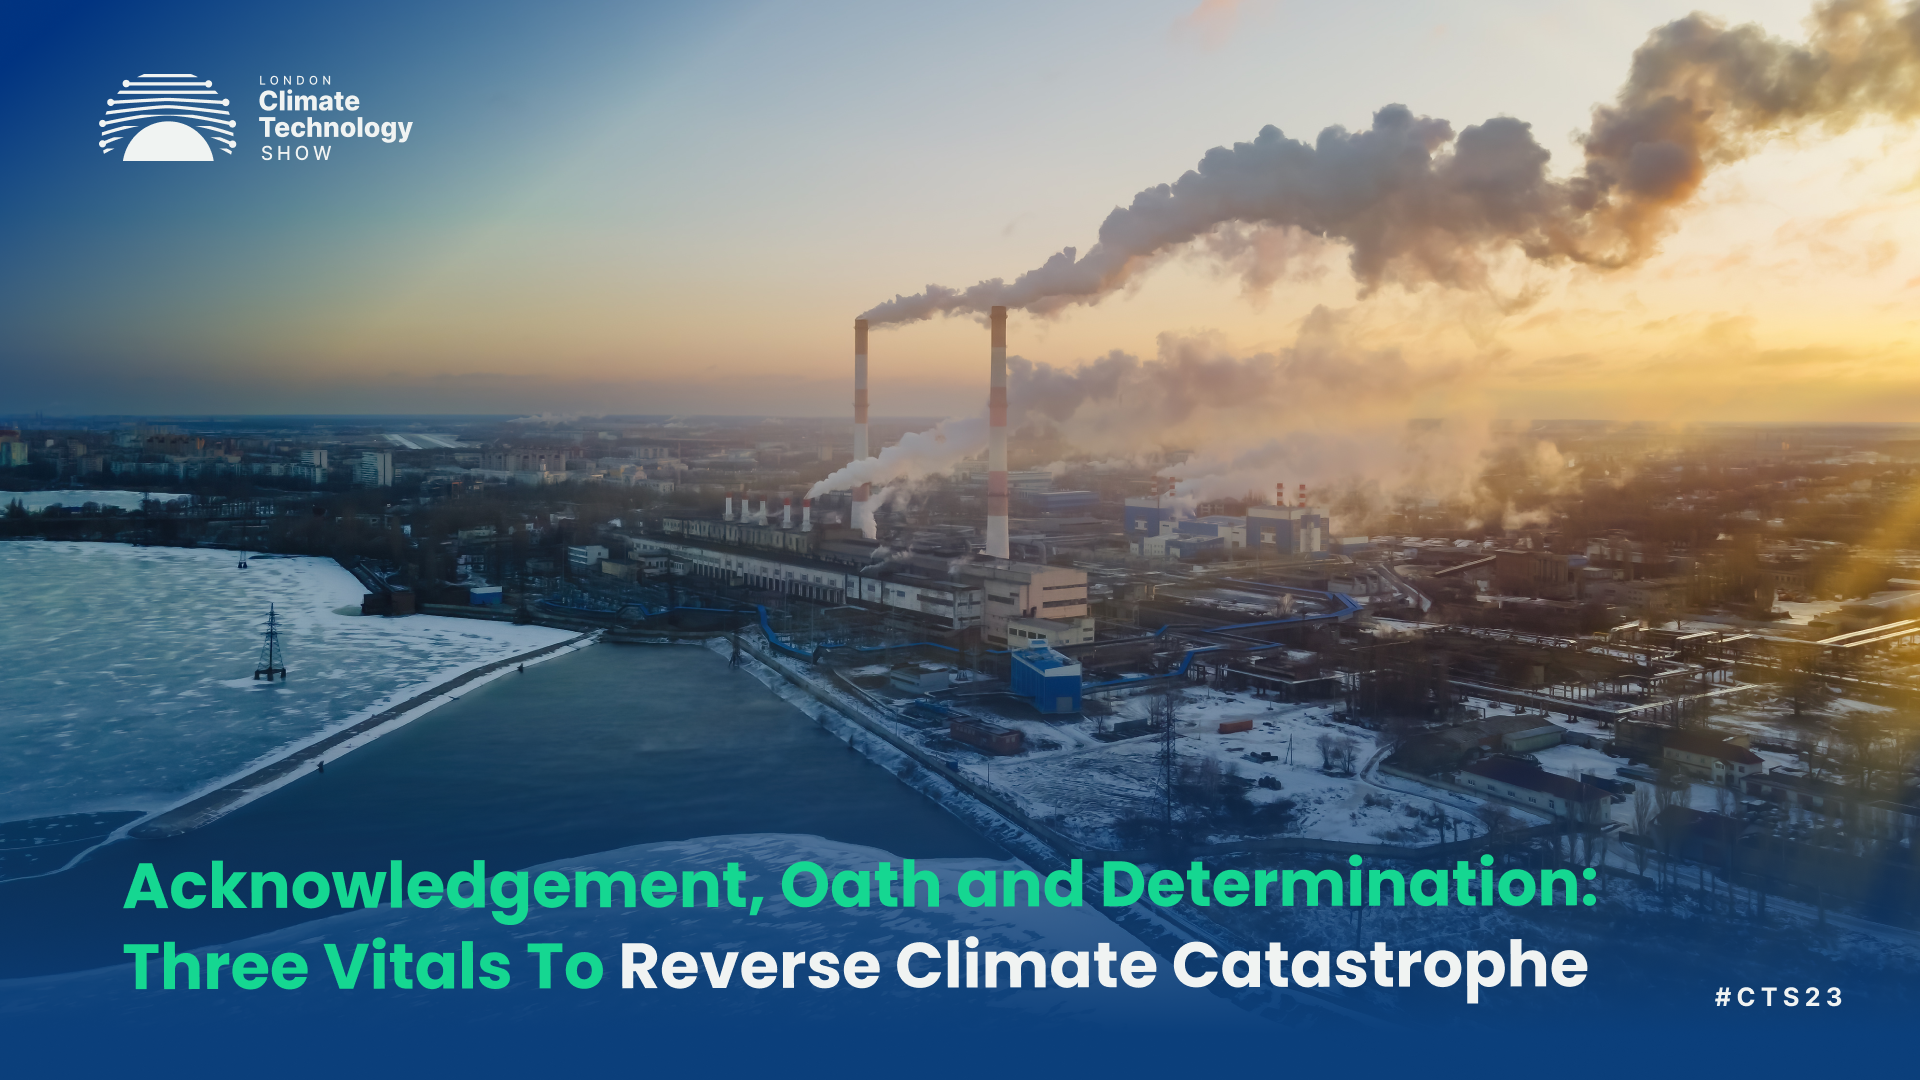 Acknowledgement, Oath and Determination: Three Vitals To Reverse Climate Catastrophe